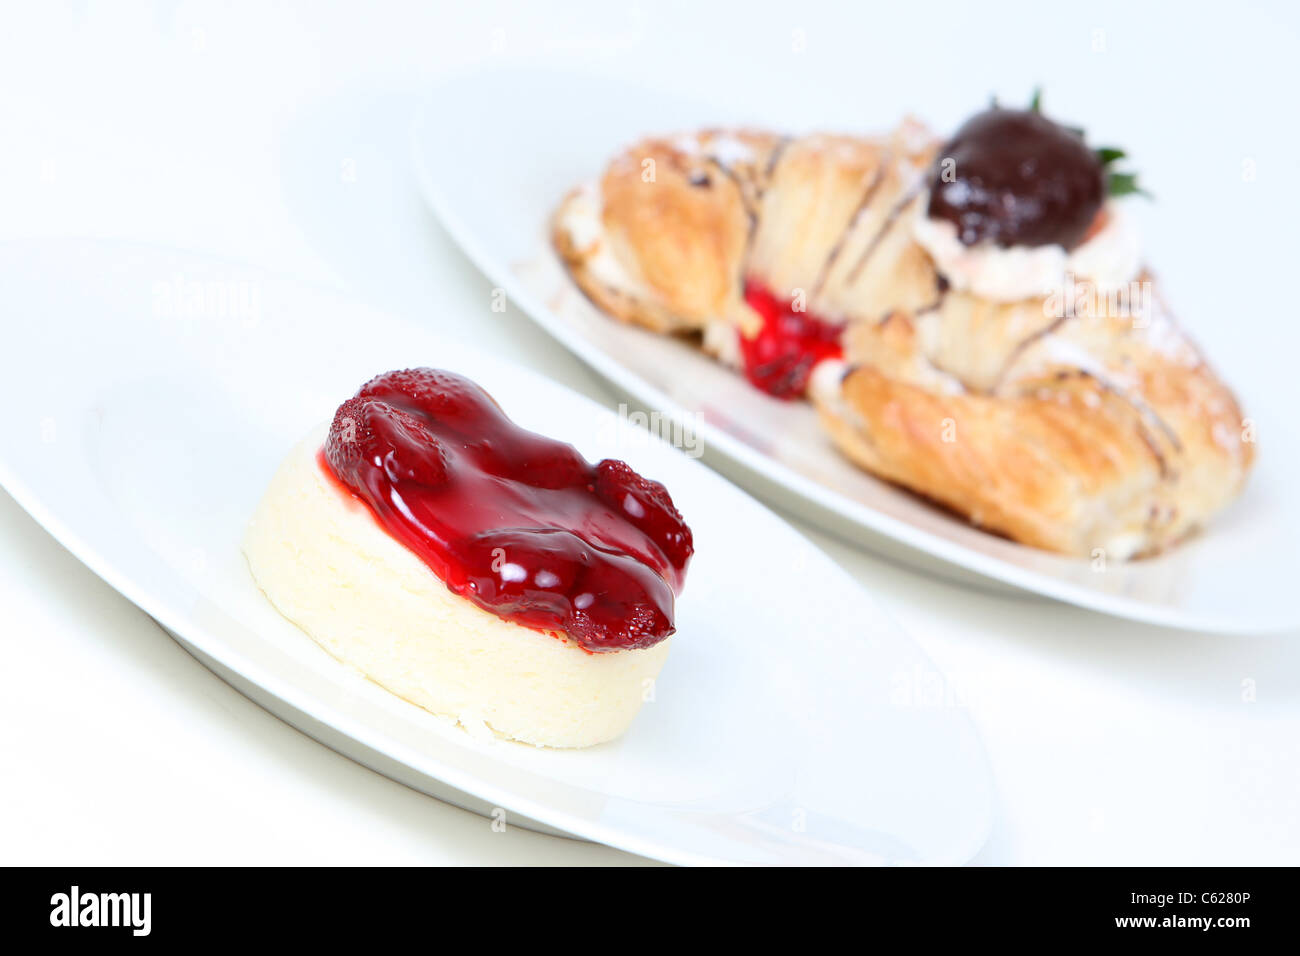 Strawberry cheesecake and creme filled croissant with chocolate strawberry Stock Photo